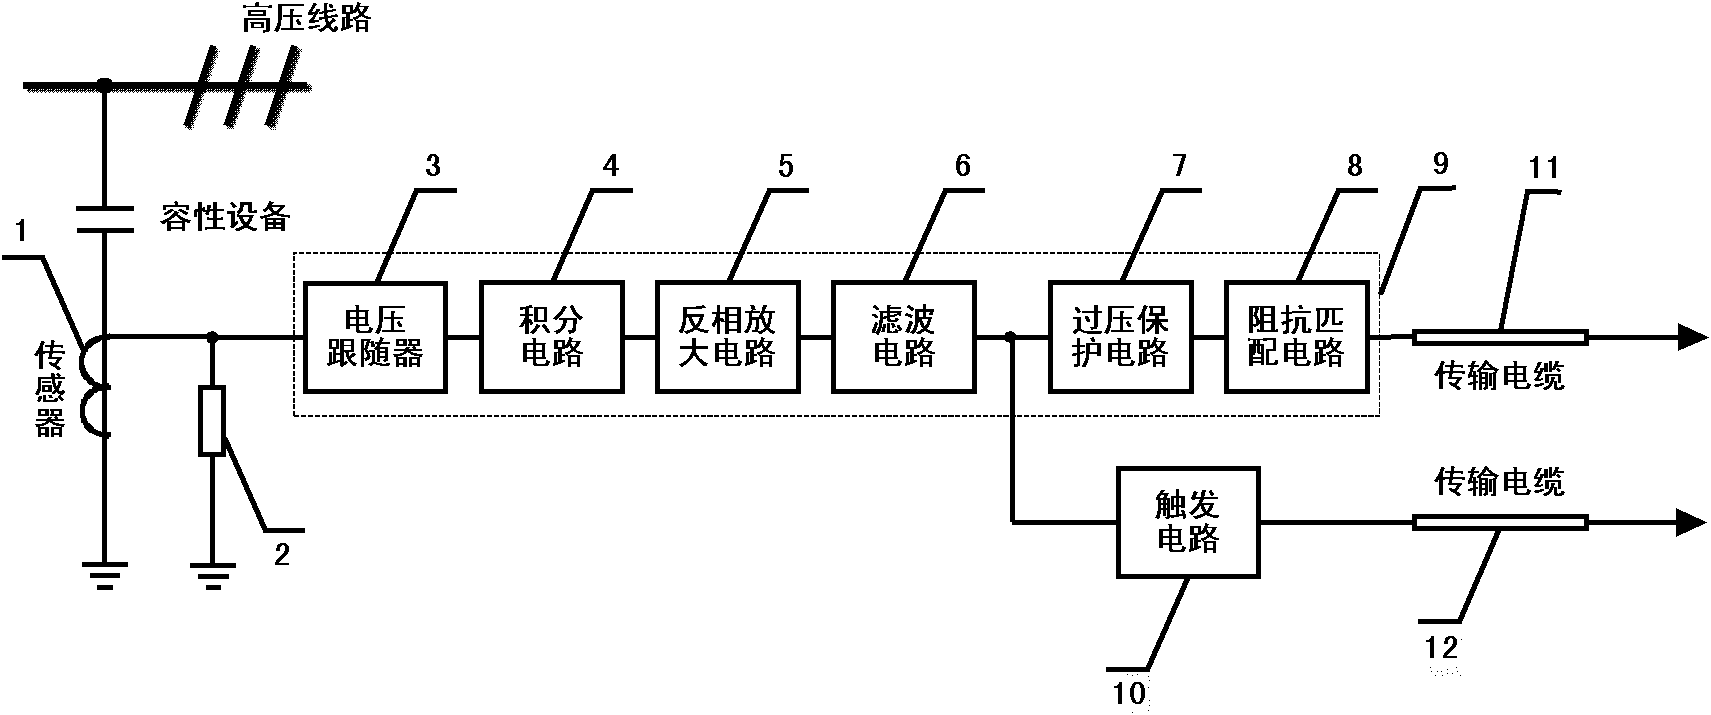 Sensor device for monitoring transient voltage of broadband integral type power grid